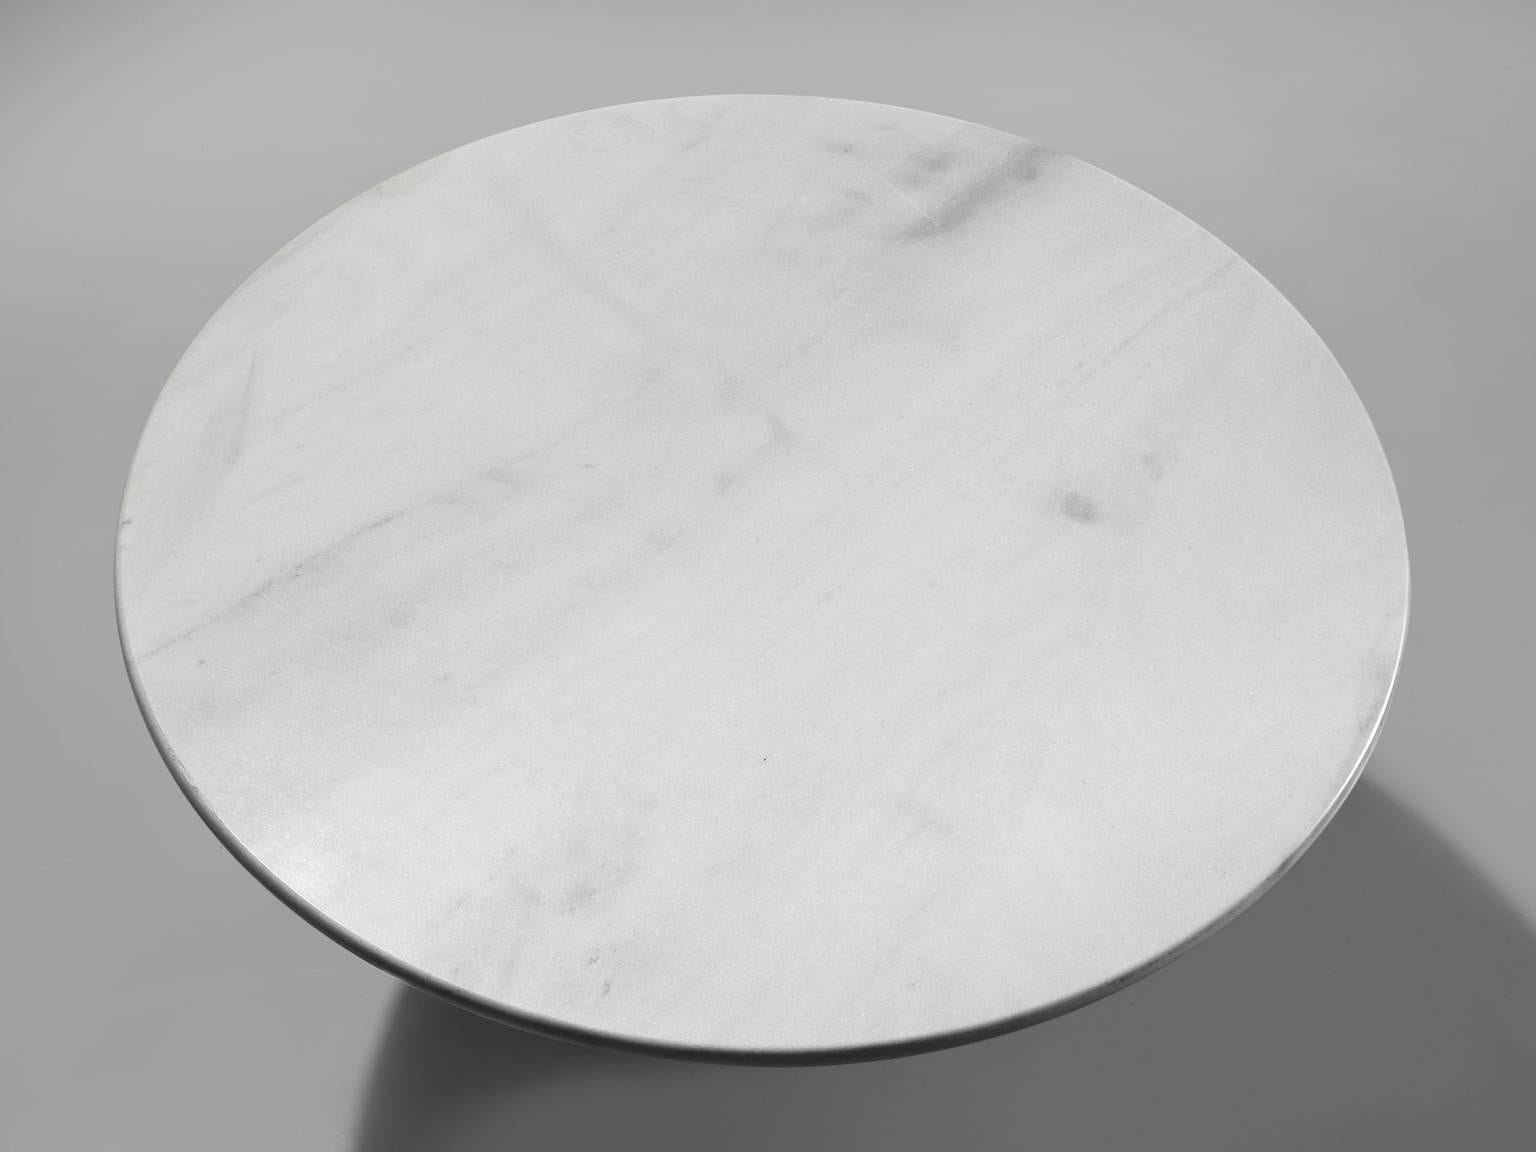 Late 20th Century Post-Modern German Marble Center Table